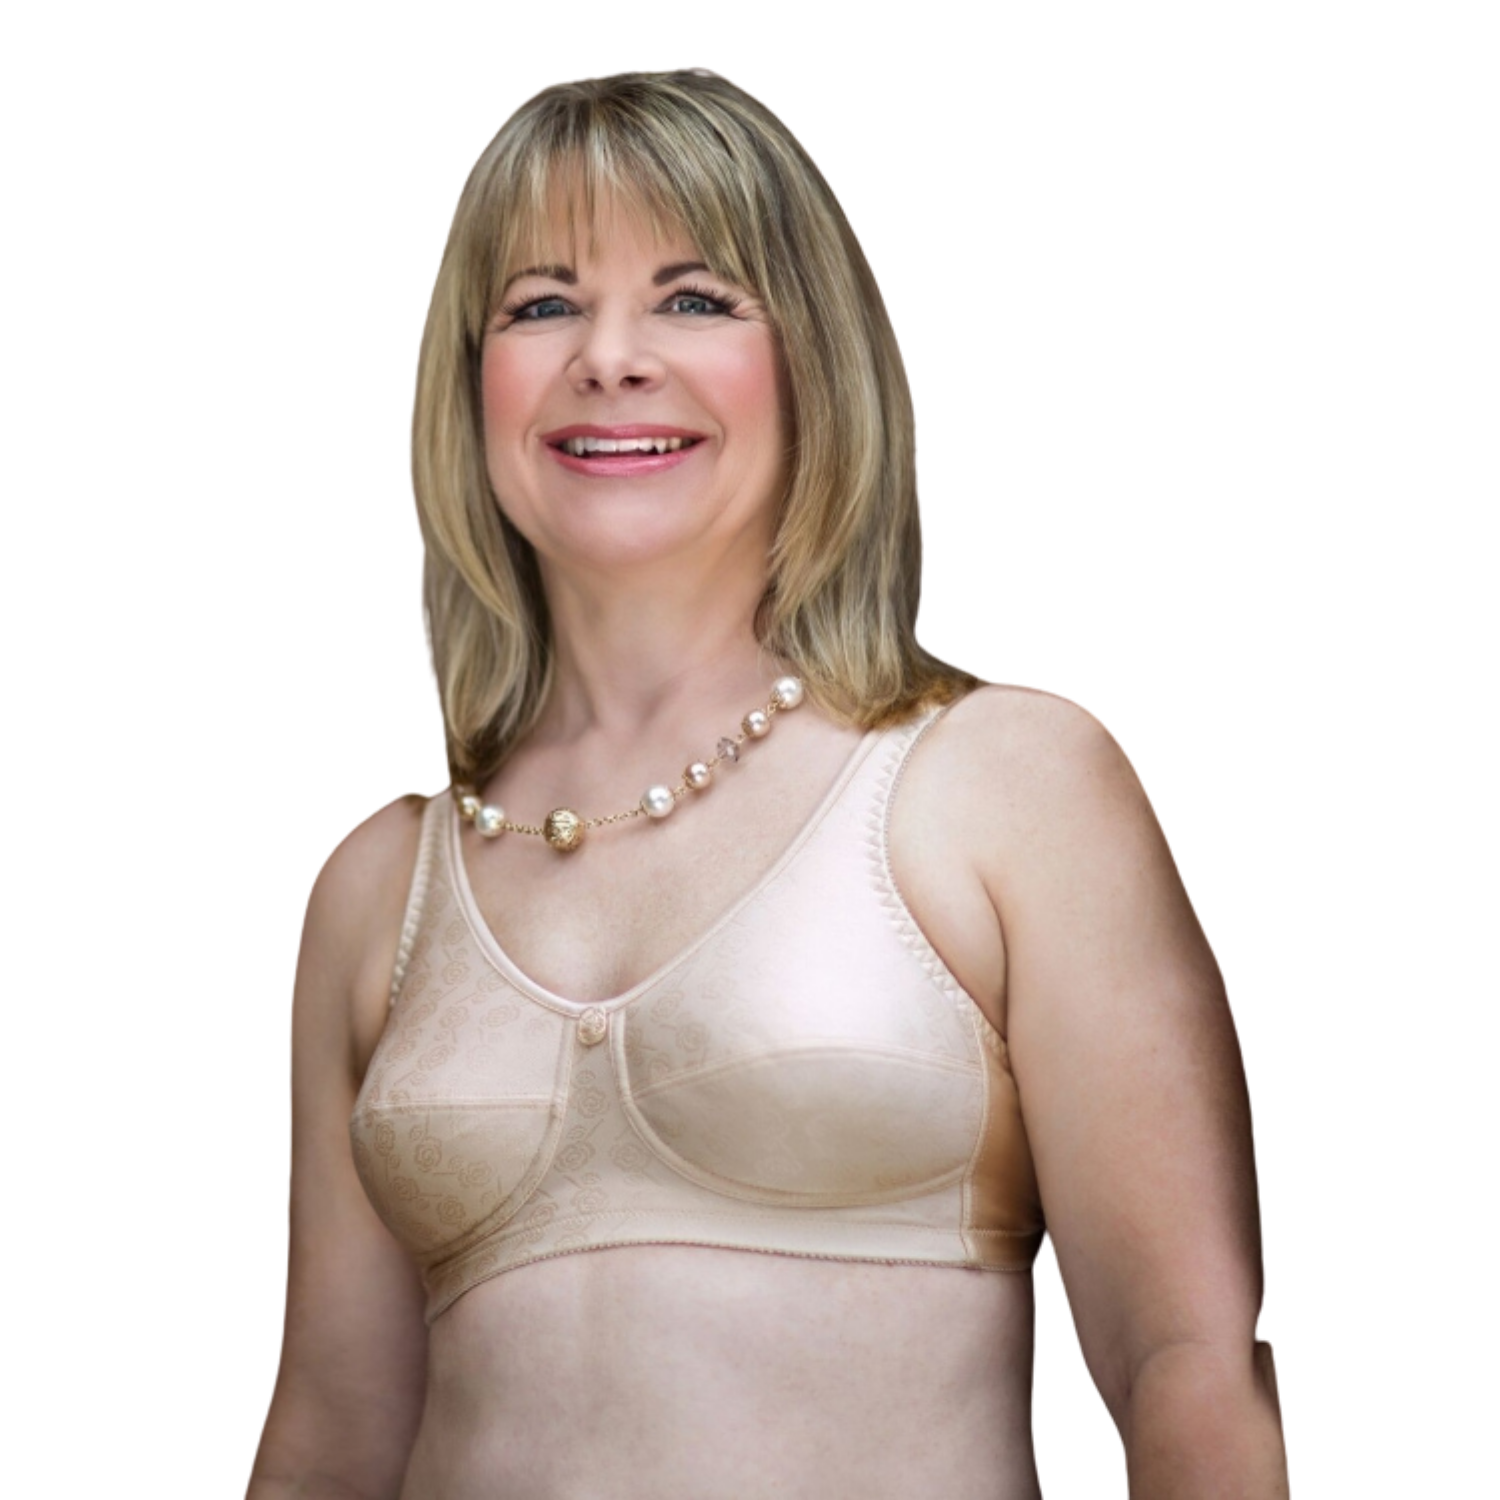 38D Mastectomy Bras - Pocketed bras & lingerie for Post Surgery